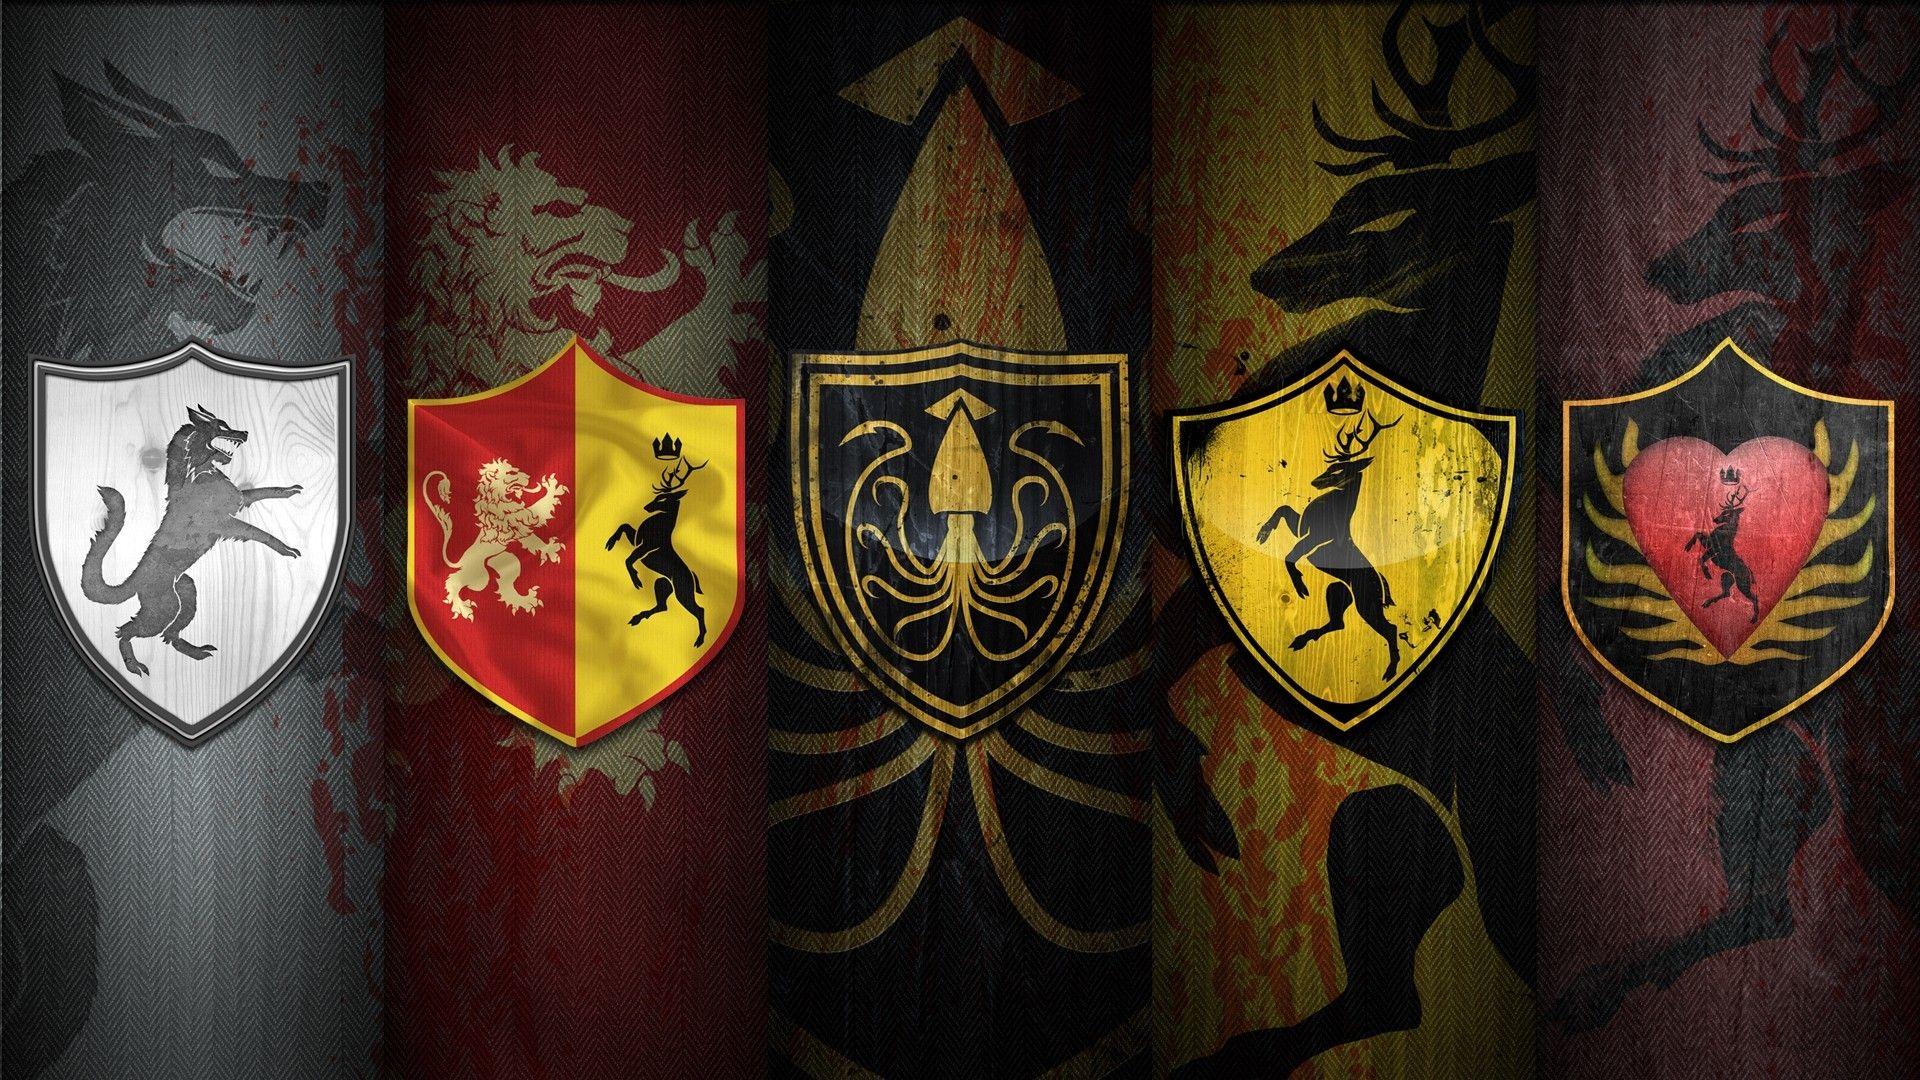 Game Of Thrones Banner Wallpapers Top Free Game Of Thrones Banner Backgrounds Wallpaperaccess